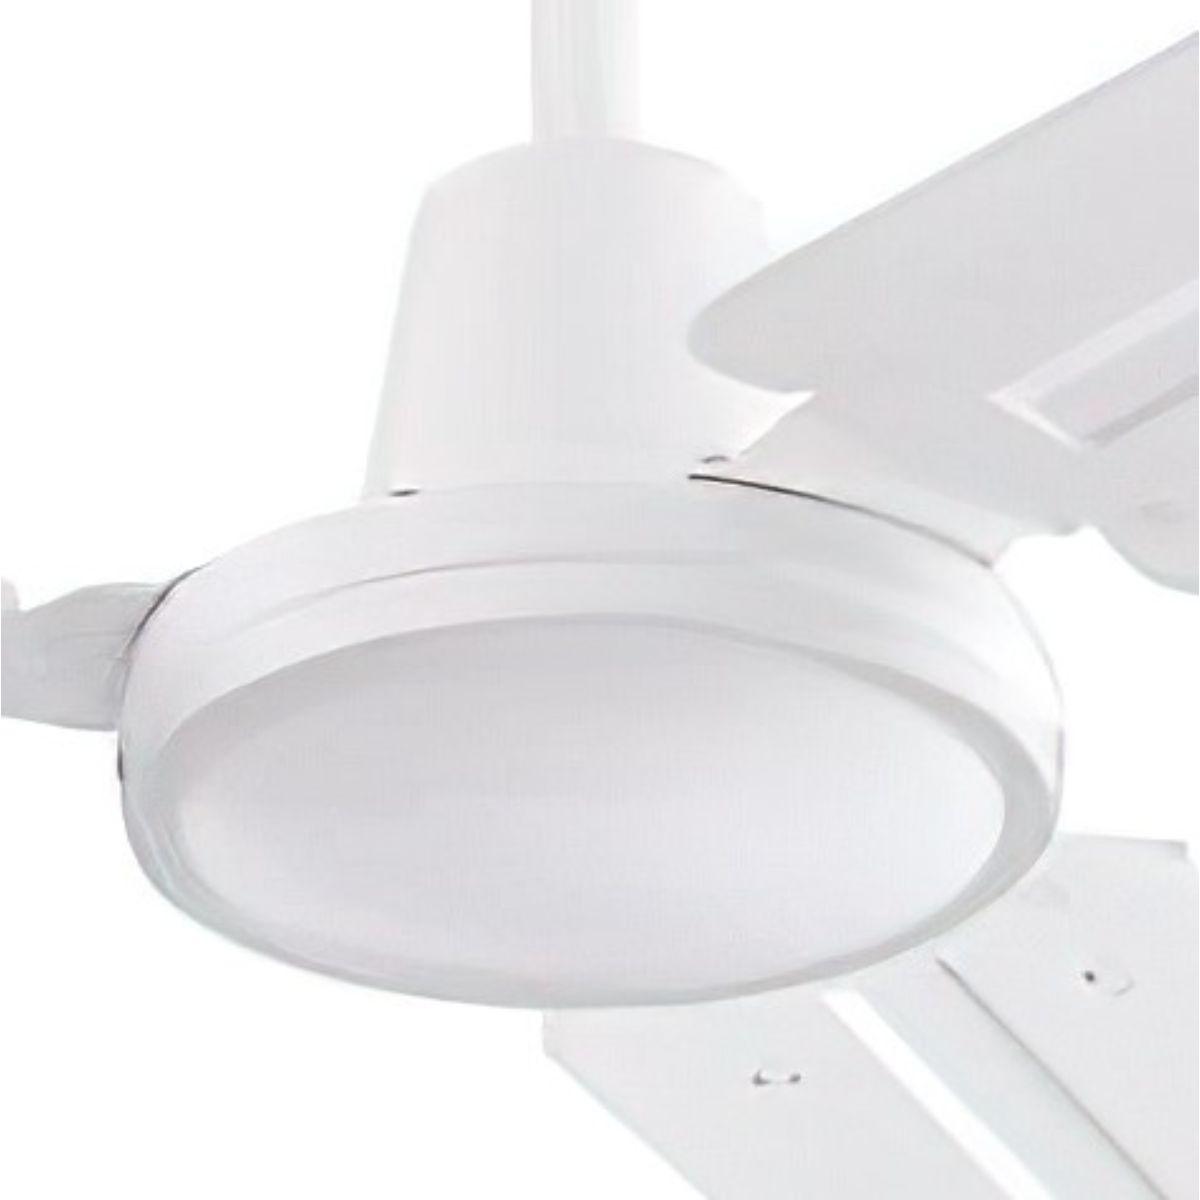 Jax 56 Inch Industrial Ceiling Fan, White Finish, Wall Control Included